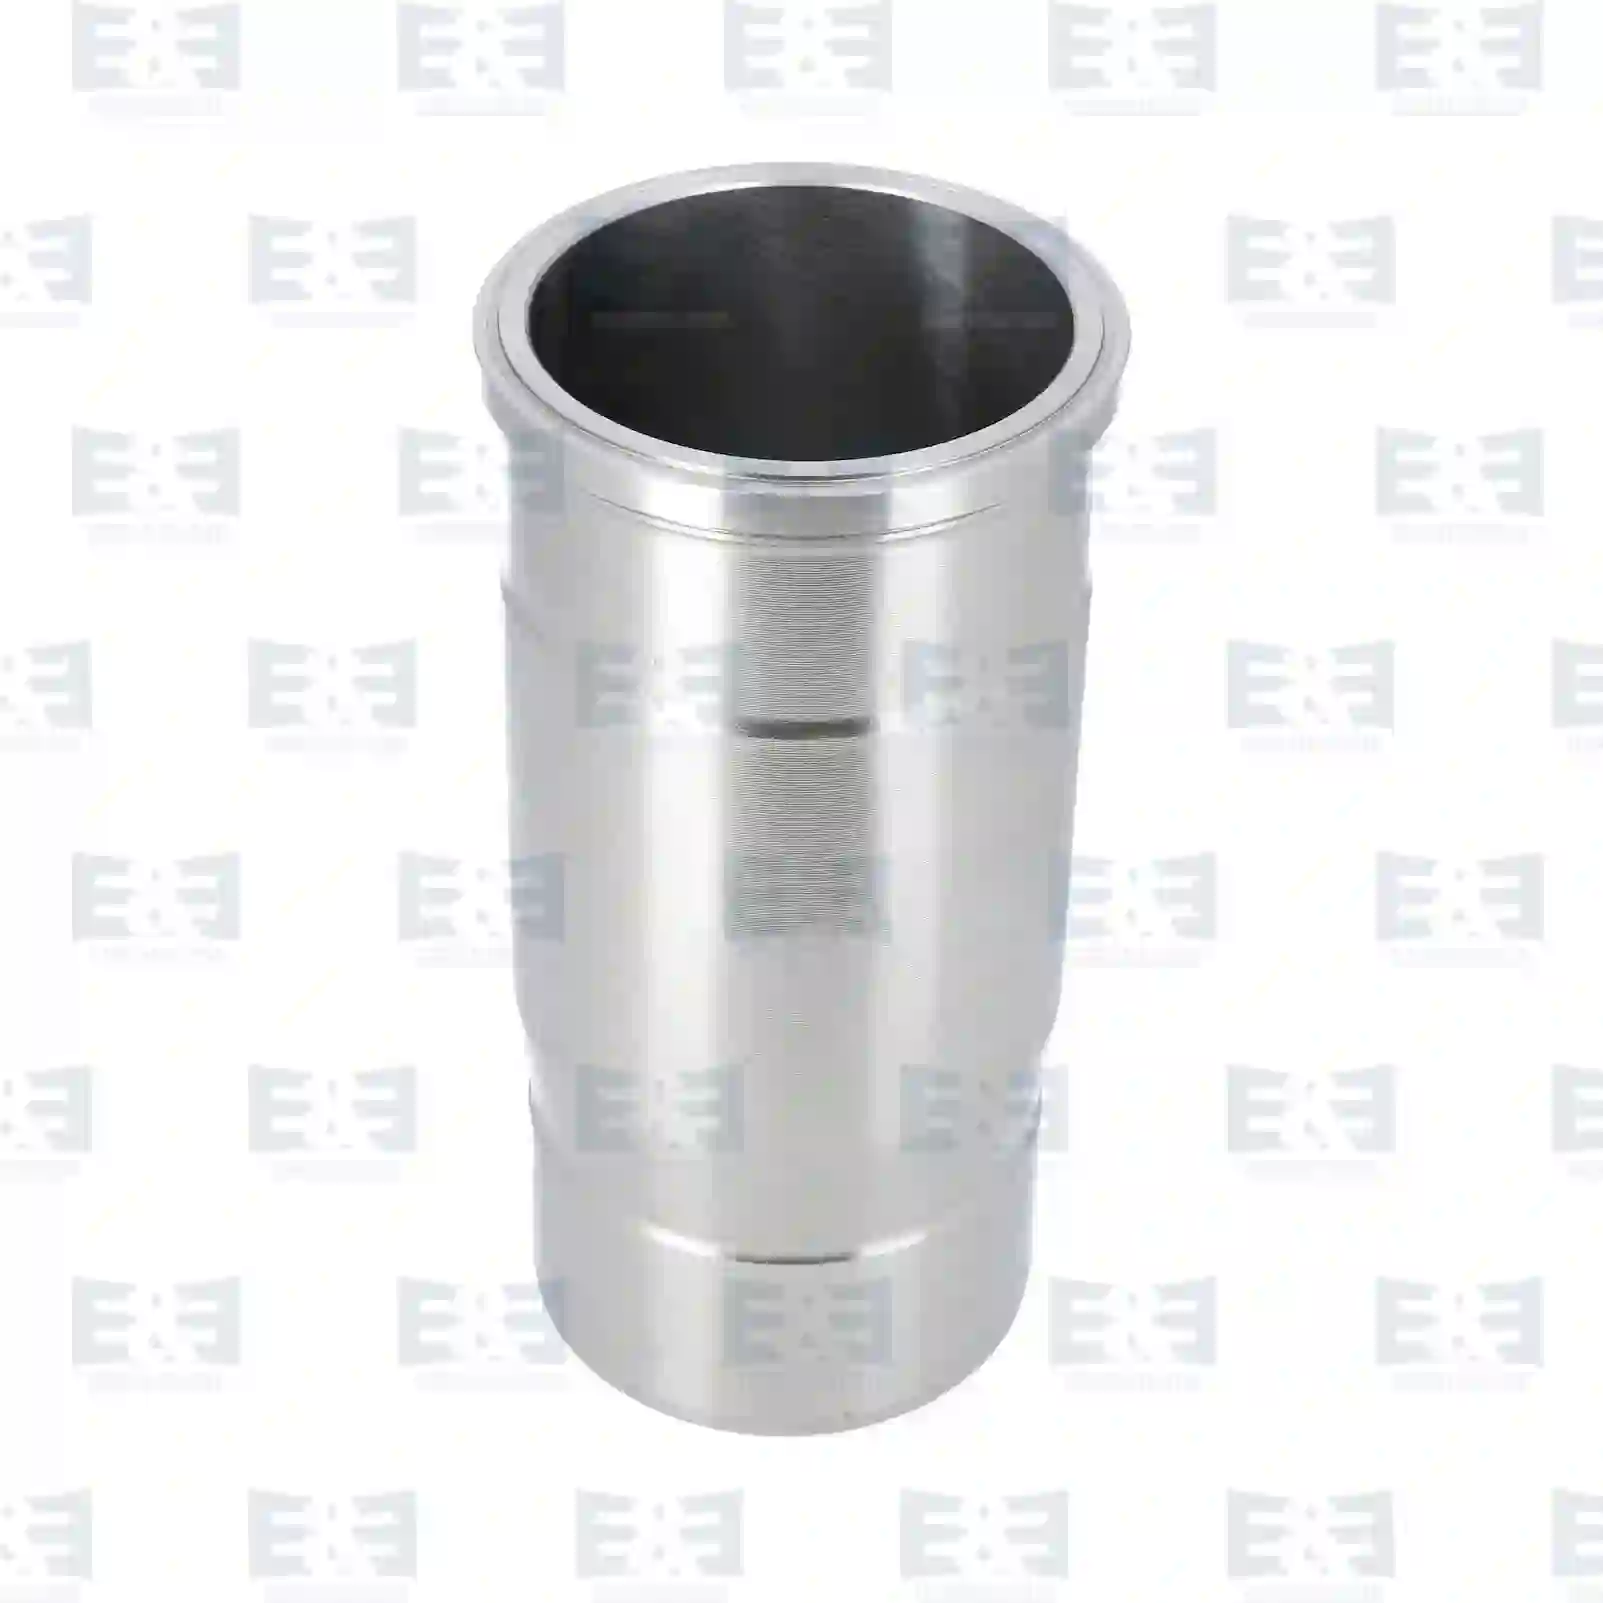 Cylinder liner, without seal rings, 2E2208338, 20483013, , , ||  2E2208338 E&E Truck Spare Parts | Truck Spare Parts, Auotomotive Spare Parts Cylinder liner, without seal rings, 2E2208338, 20483013, , , ||  2E2208338 E&E Truck Spare Parts | Truck Spare Parts, Auotomotive Spare Parts